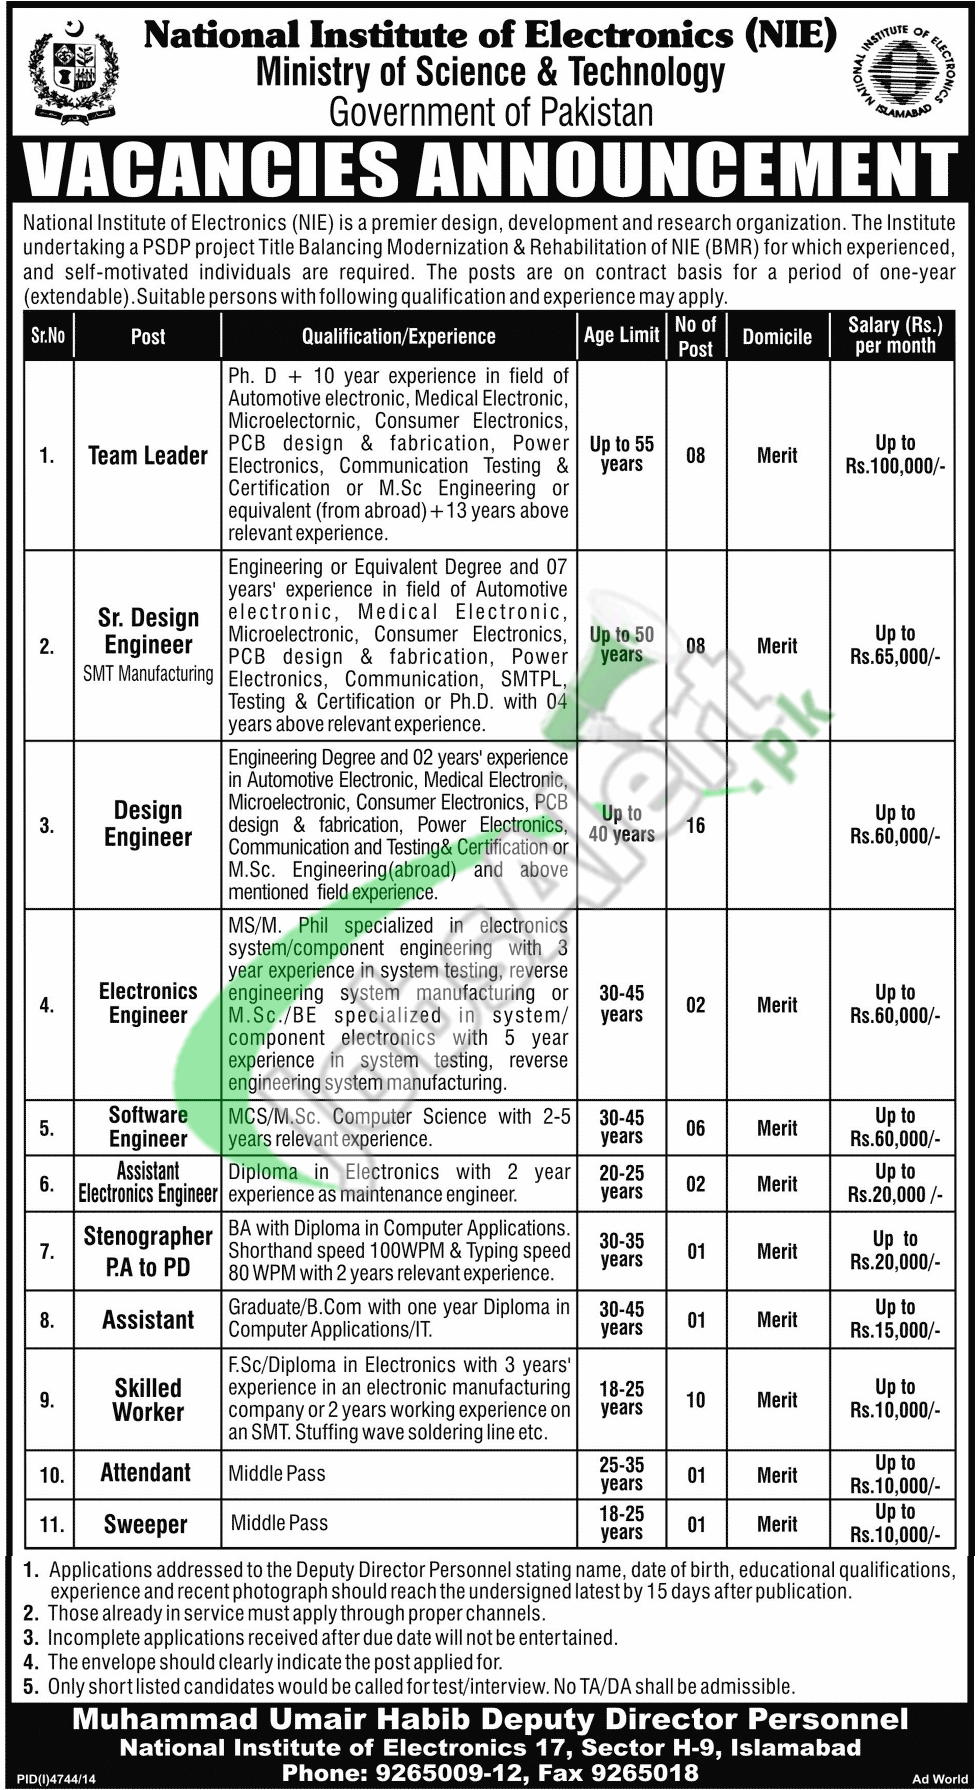 National Institute of Electronics (NIE) Islamabad Jobs